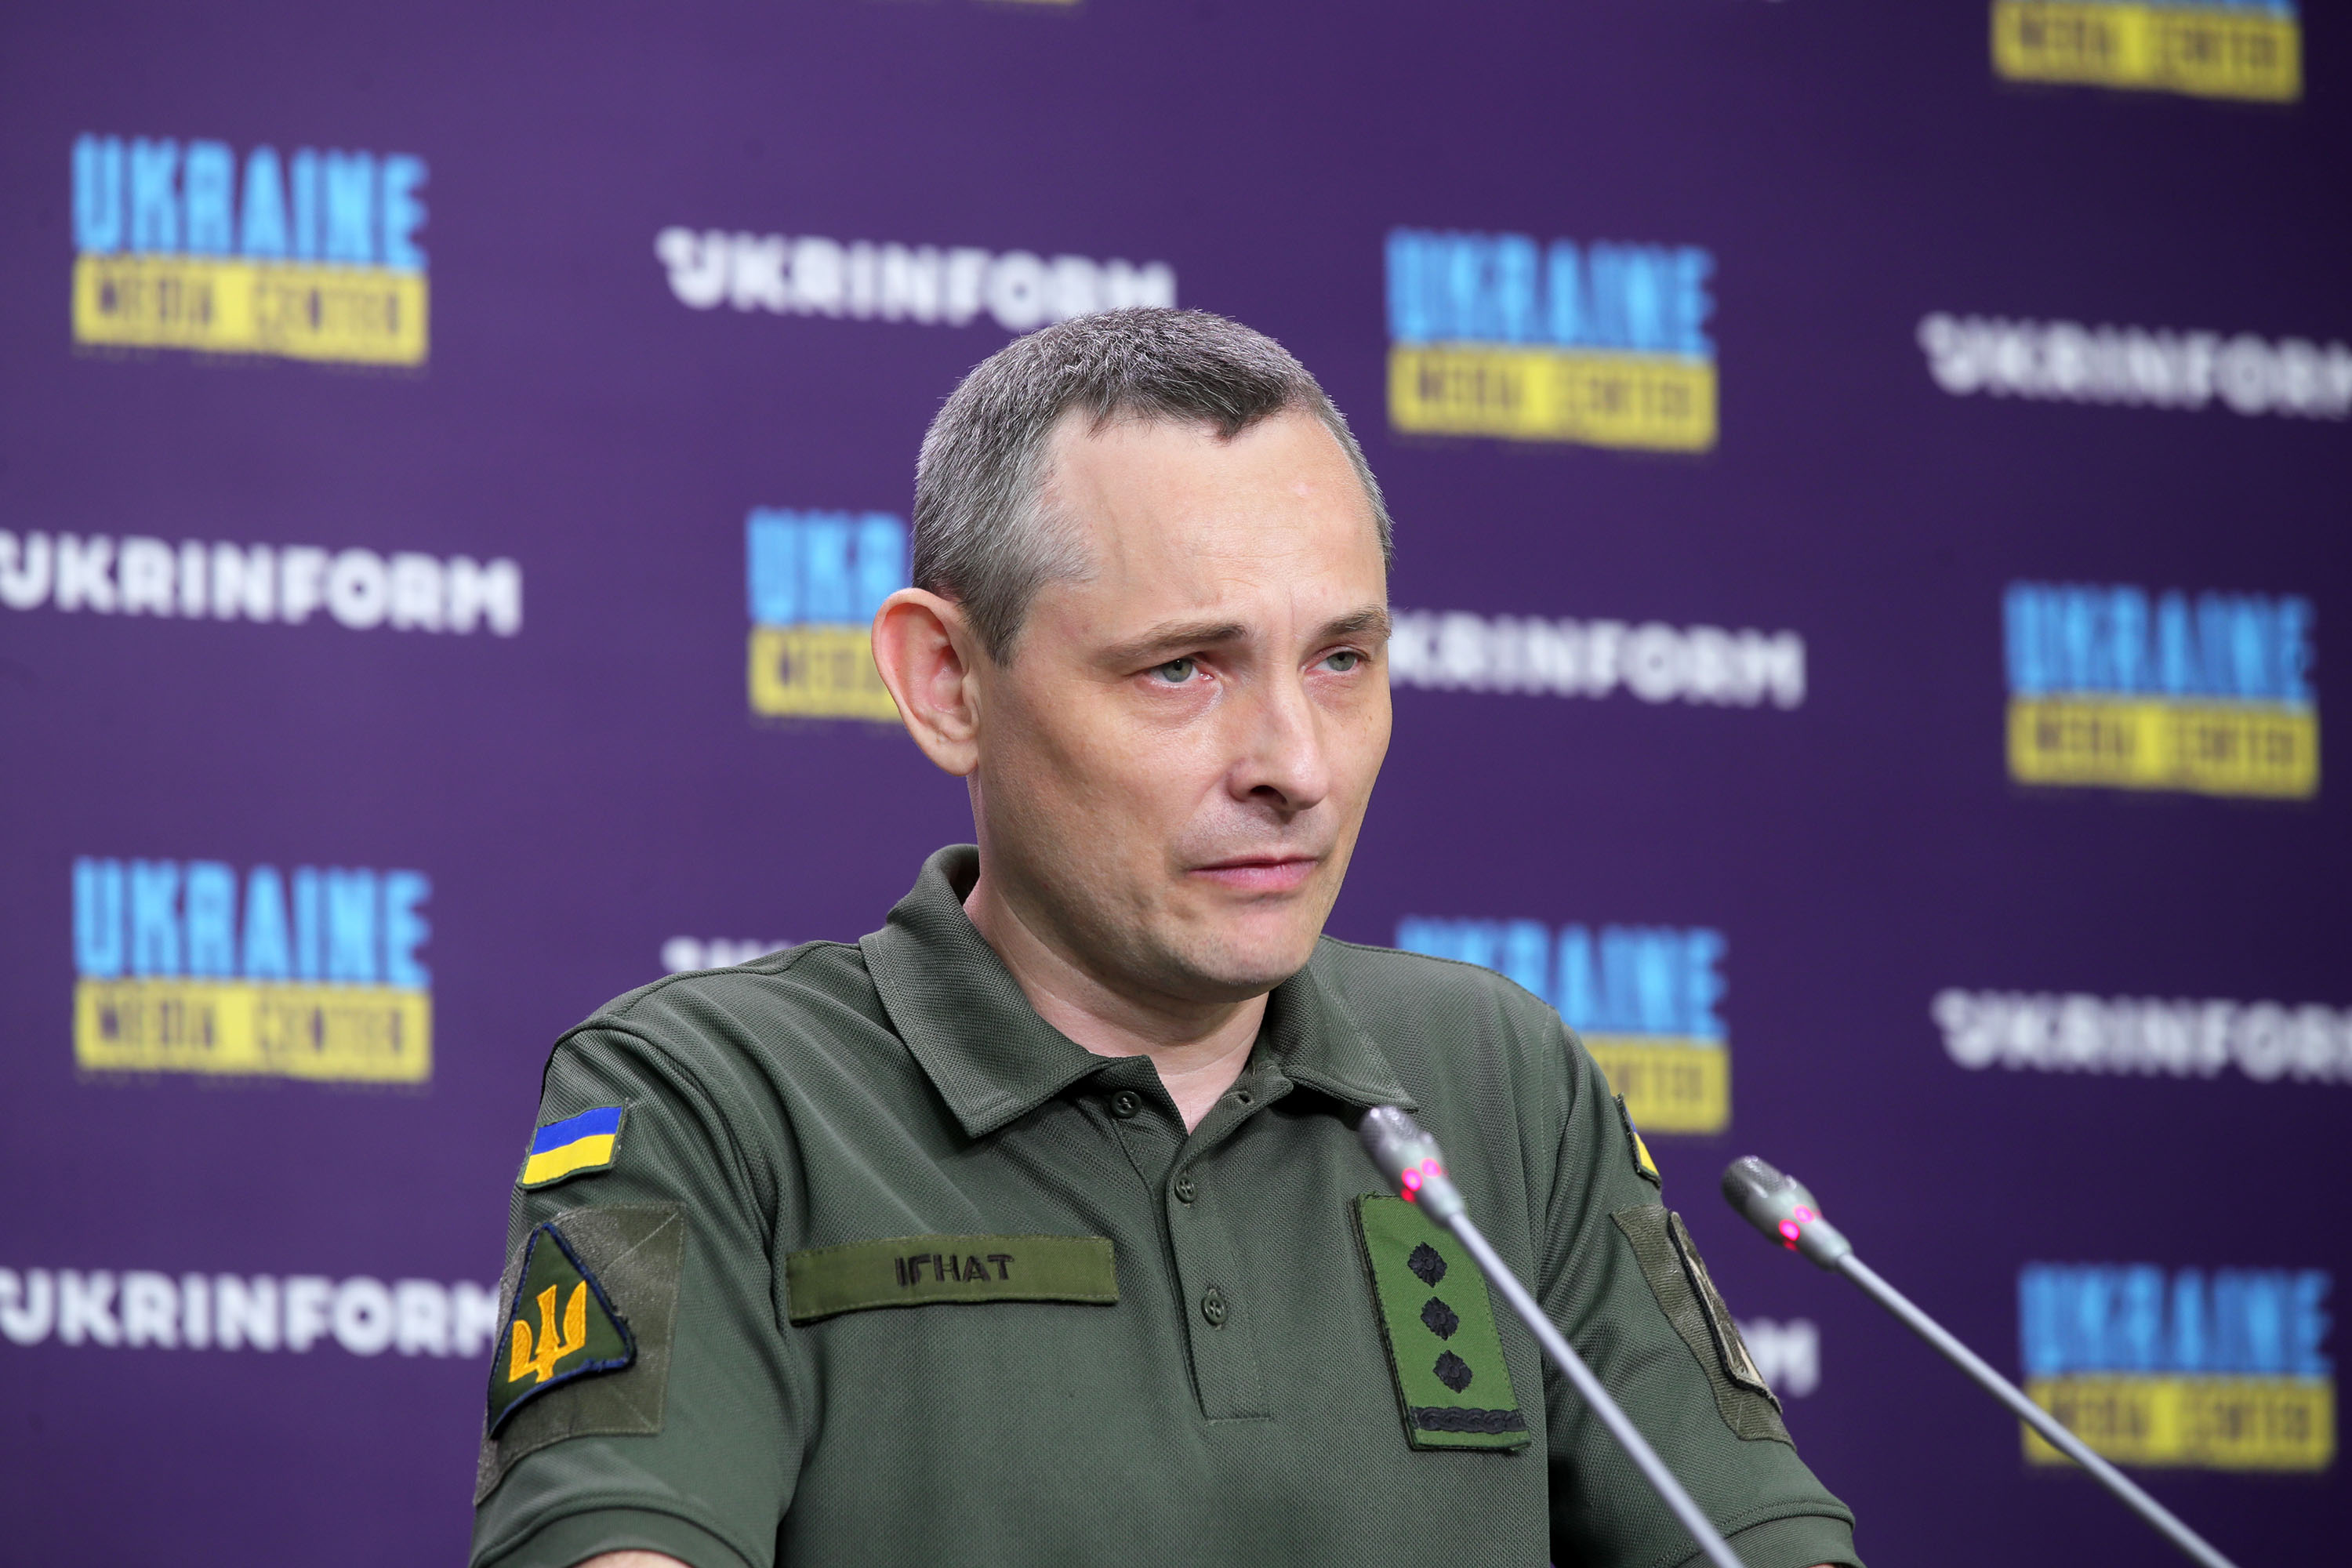 Yurii Ihnat, spokesperson for Ukraine’s Air Force Command, is pictured during a briefing in Kyiv, Ukraine, in June 2022.